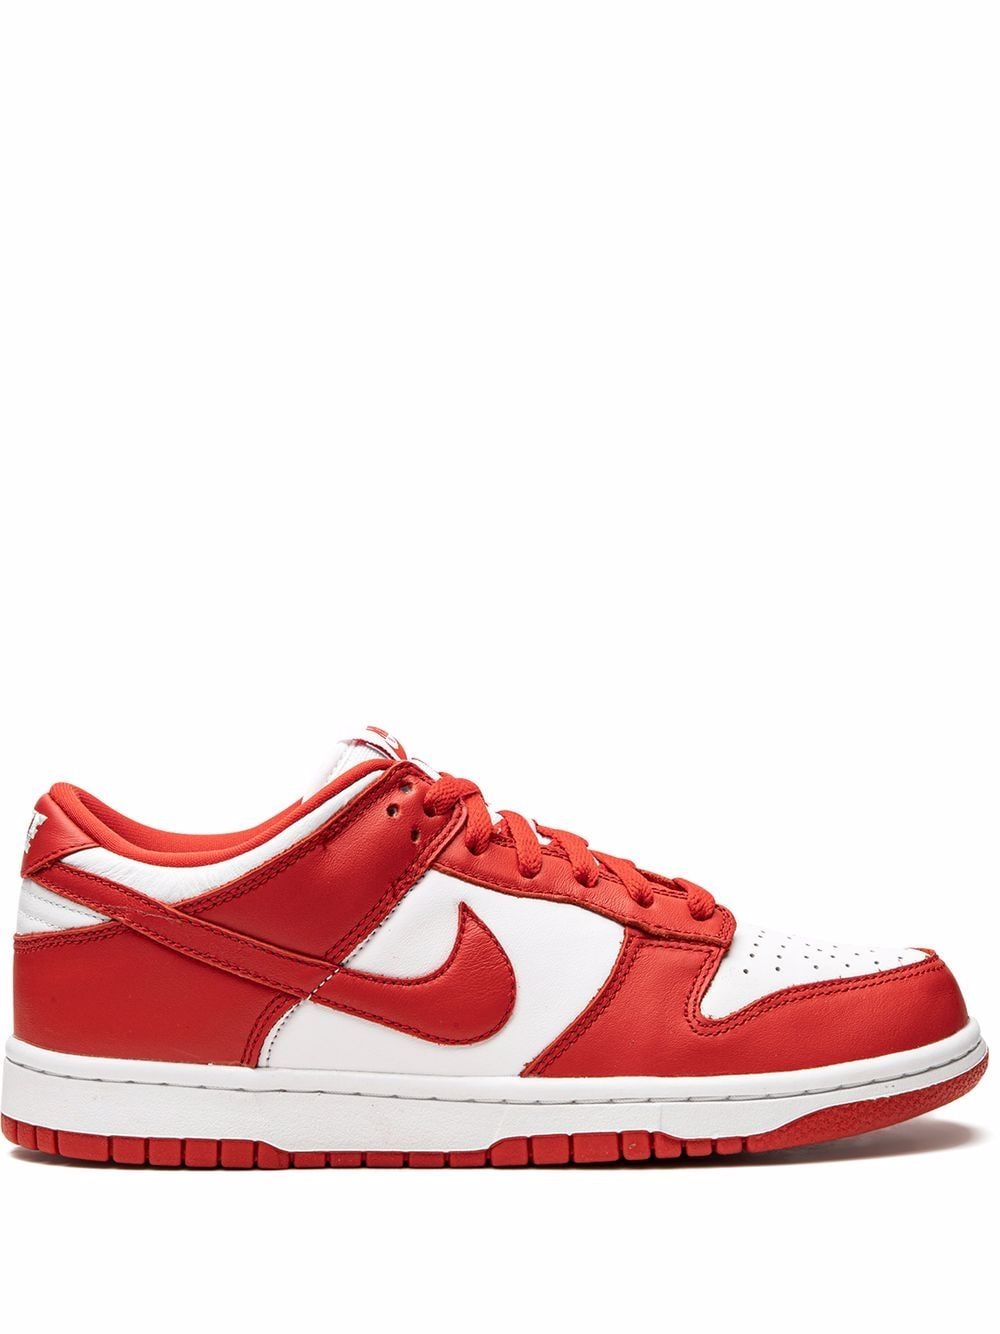 dunkNike Dunk Low SP